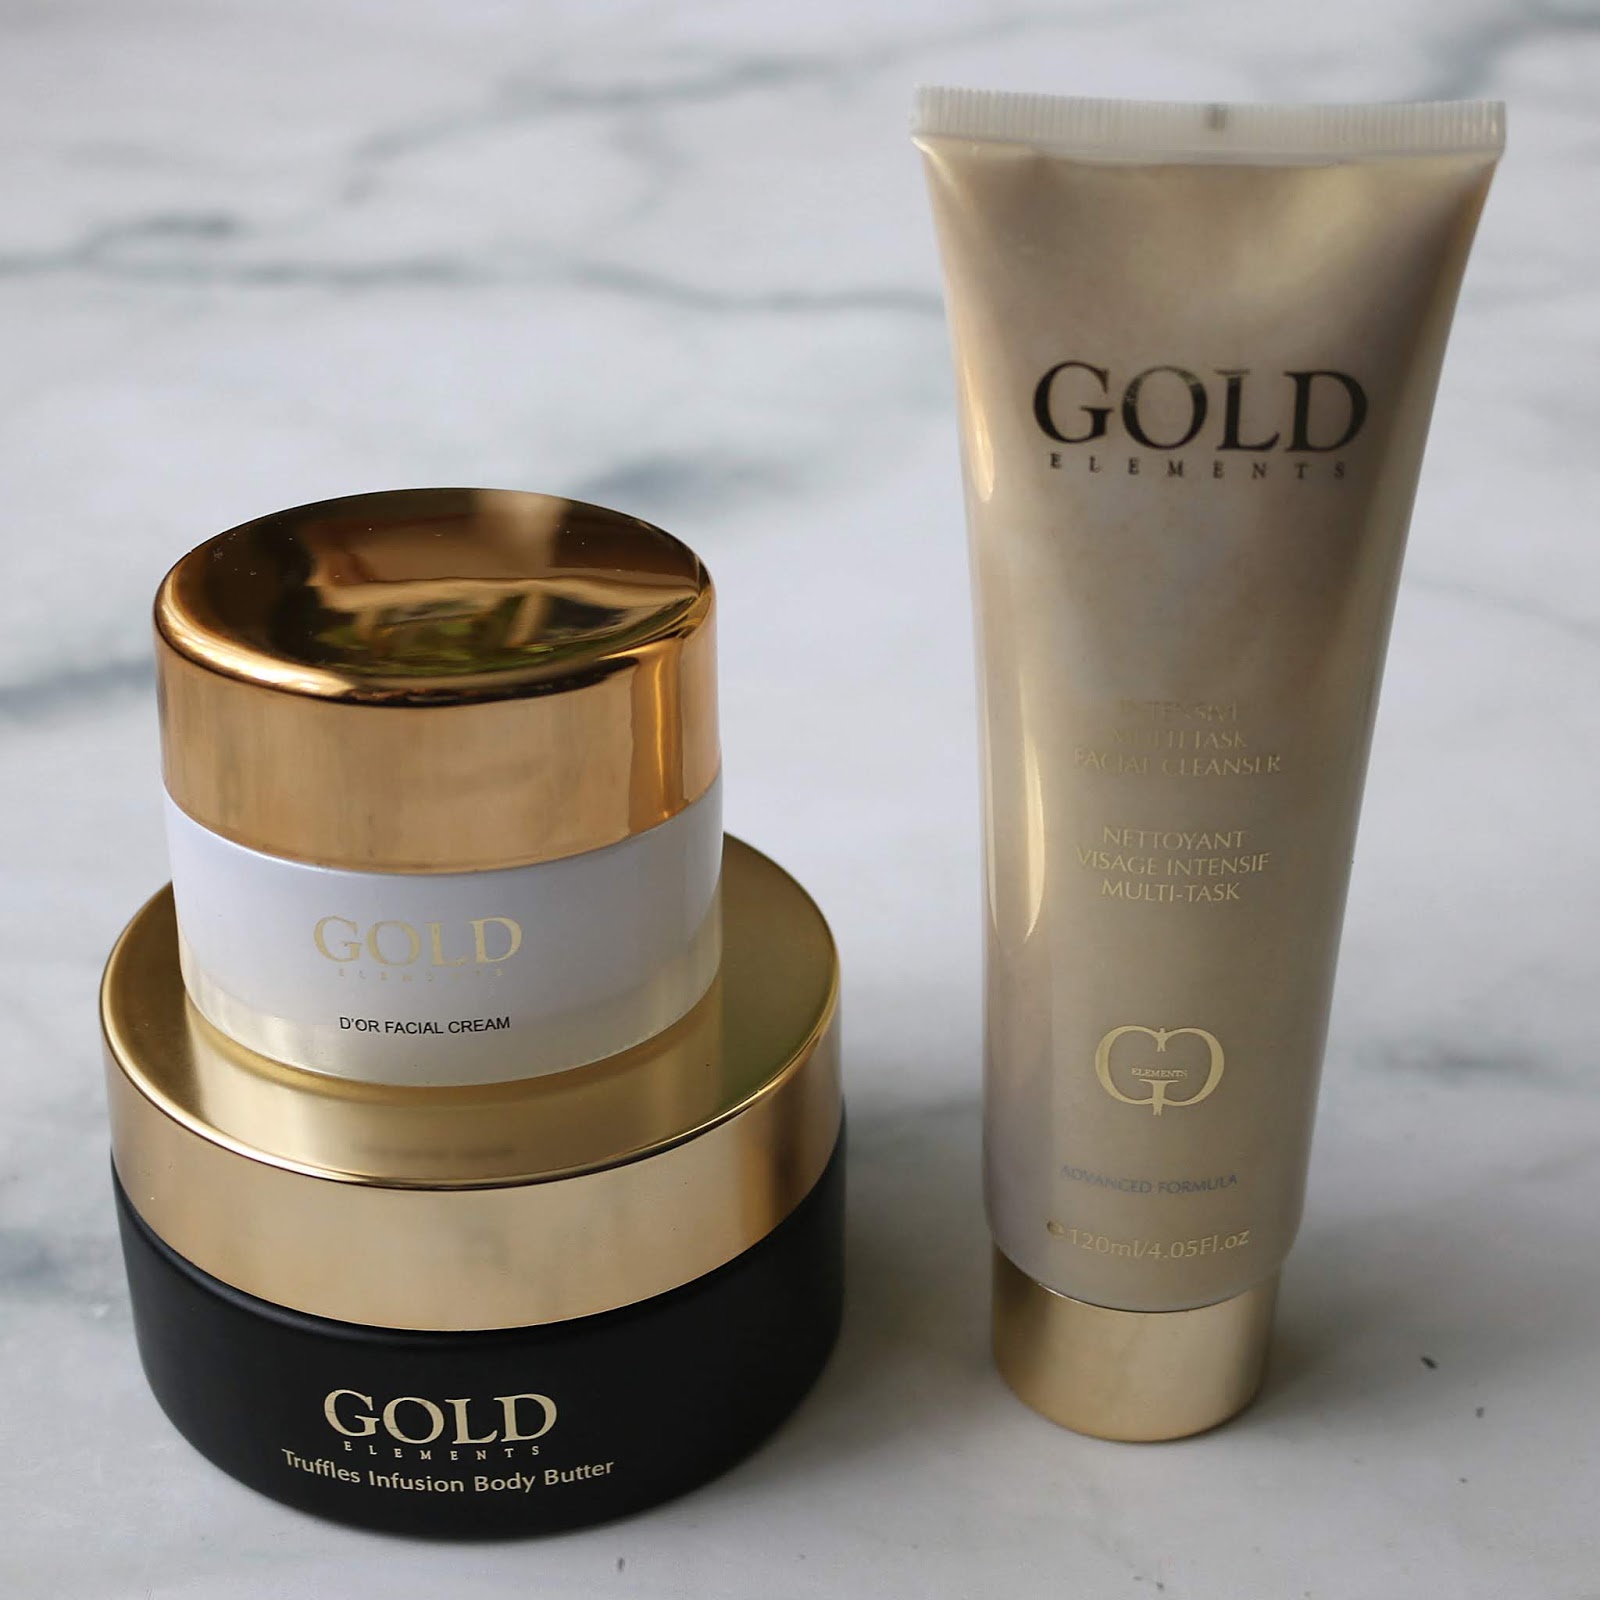 Gold Elements Intensive Multi Task Facial Cleanser D'Or Facial Cream Truffle Infusion Body Butter